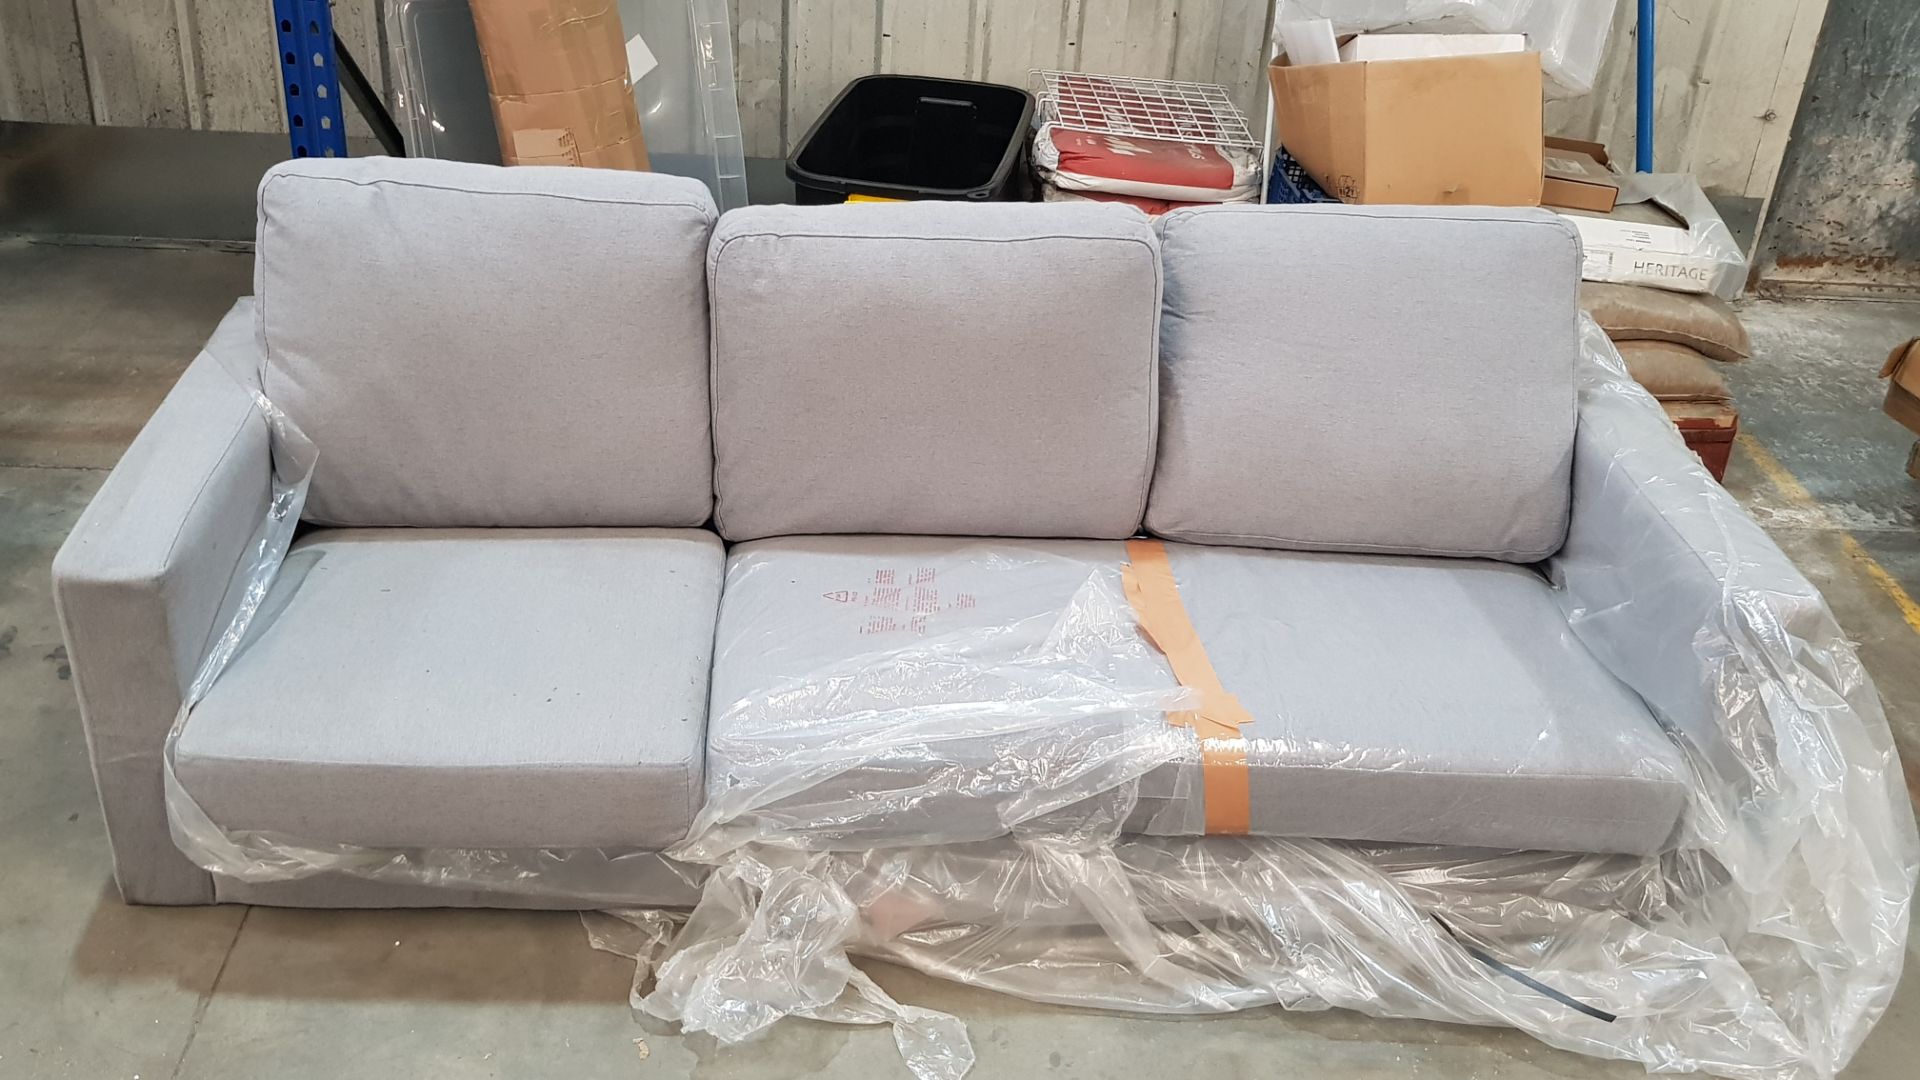 (89) 3 Seater Sofa Grey With Matching Foot Stool. (Please Note There Are No Legs In Lot). - Image 3 of 3